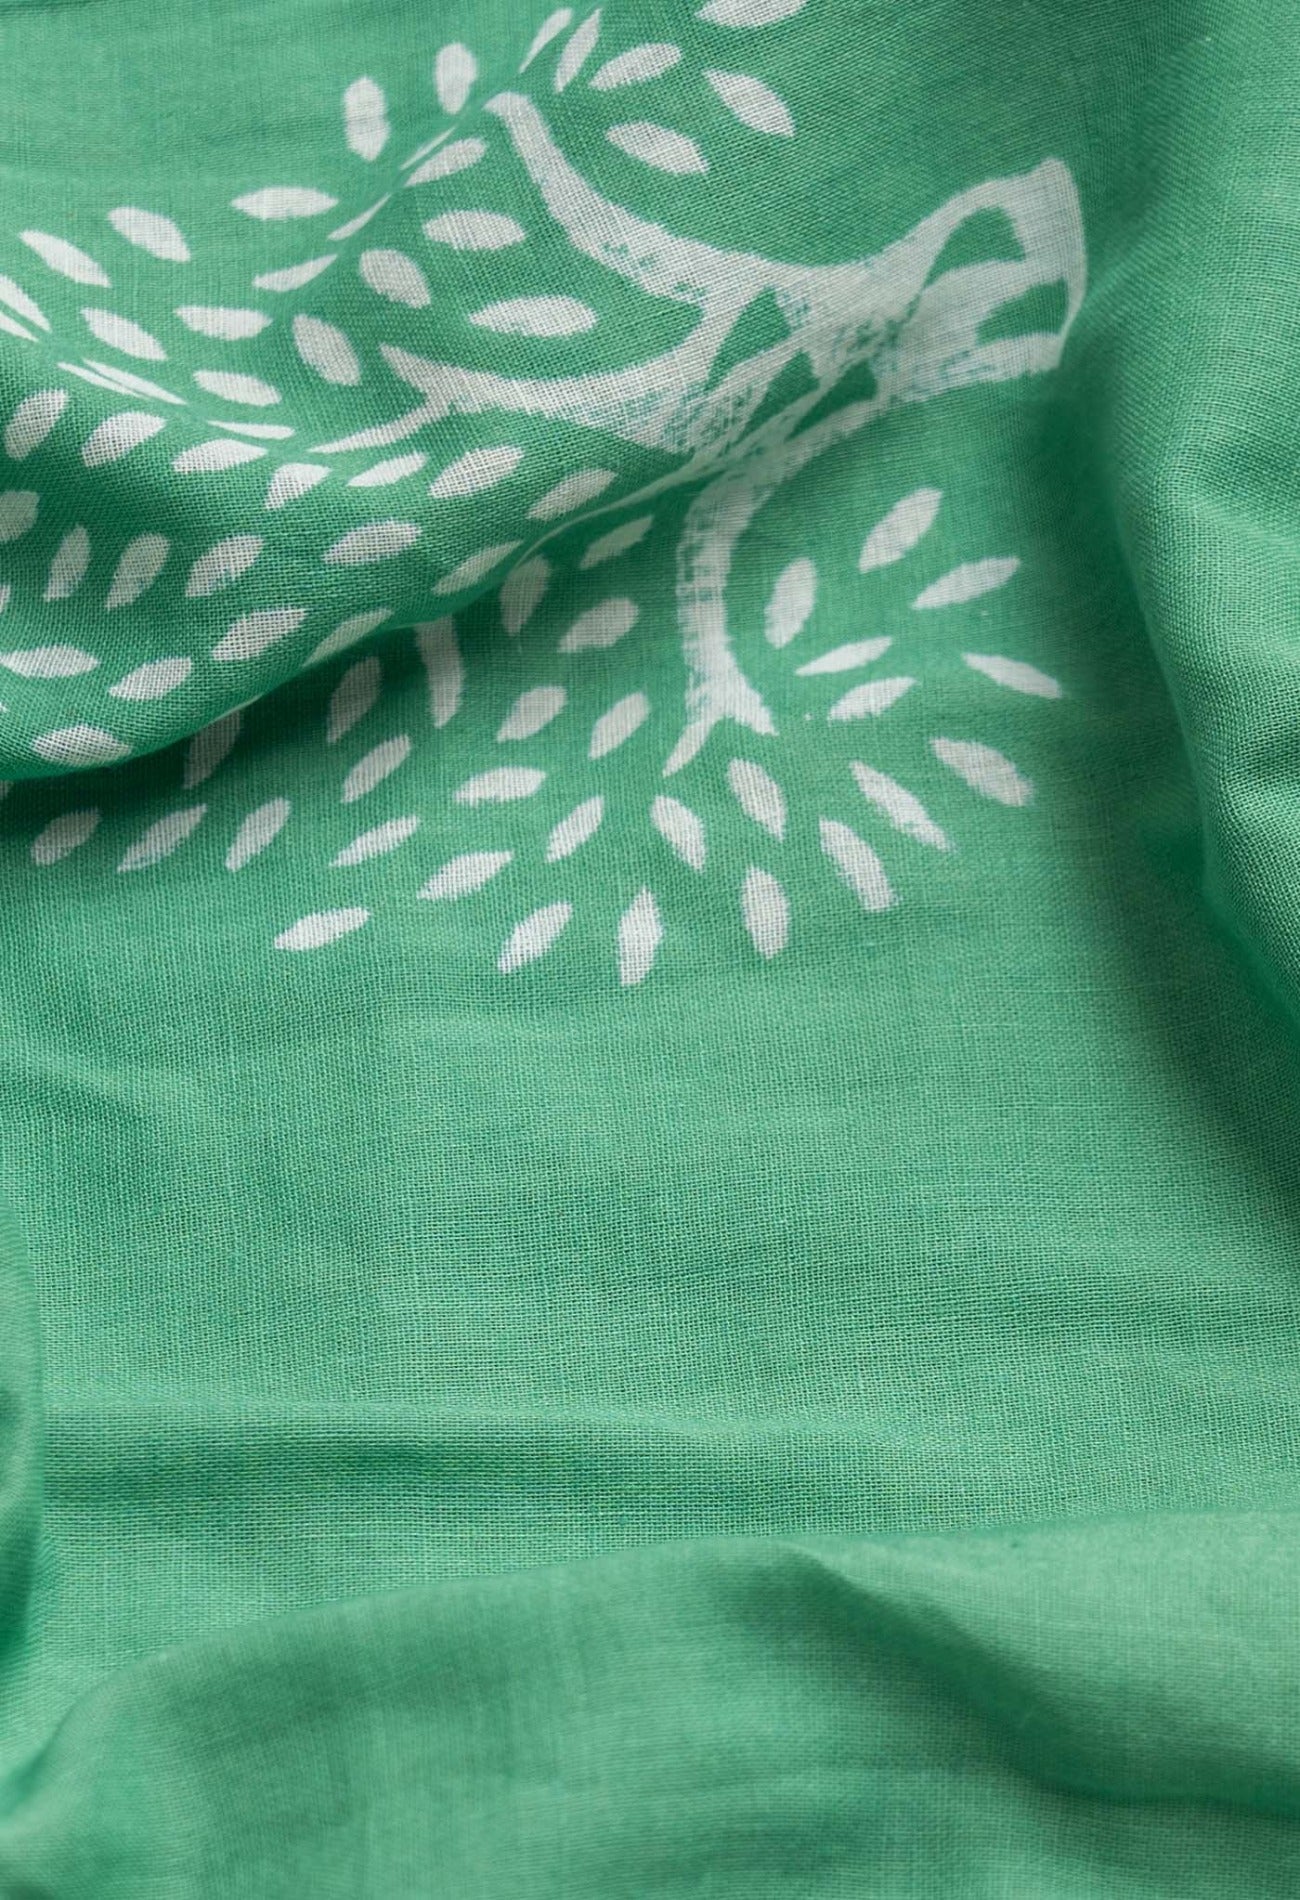 Online Shopping for Green Pure Andhra Cotton Dupatta with Hand block prints with Hand Block Prints. from Andhra Pradesh at Unnatisilks.comIndia
